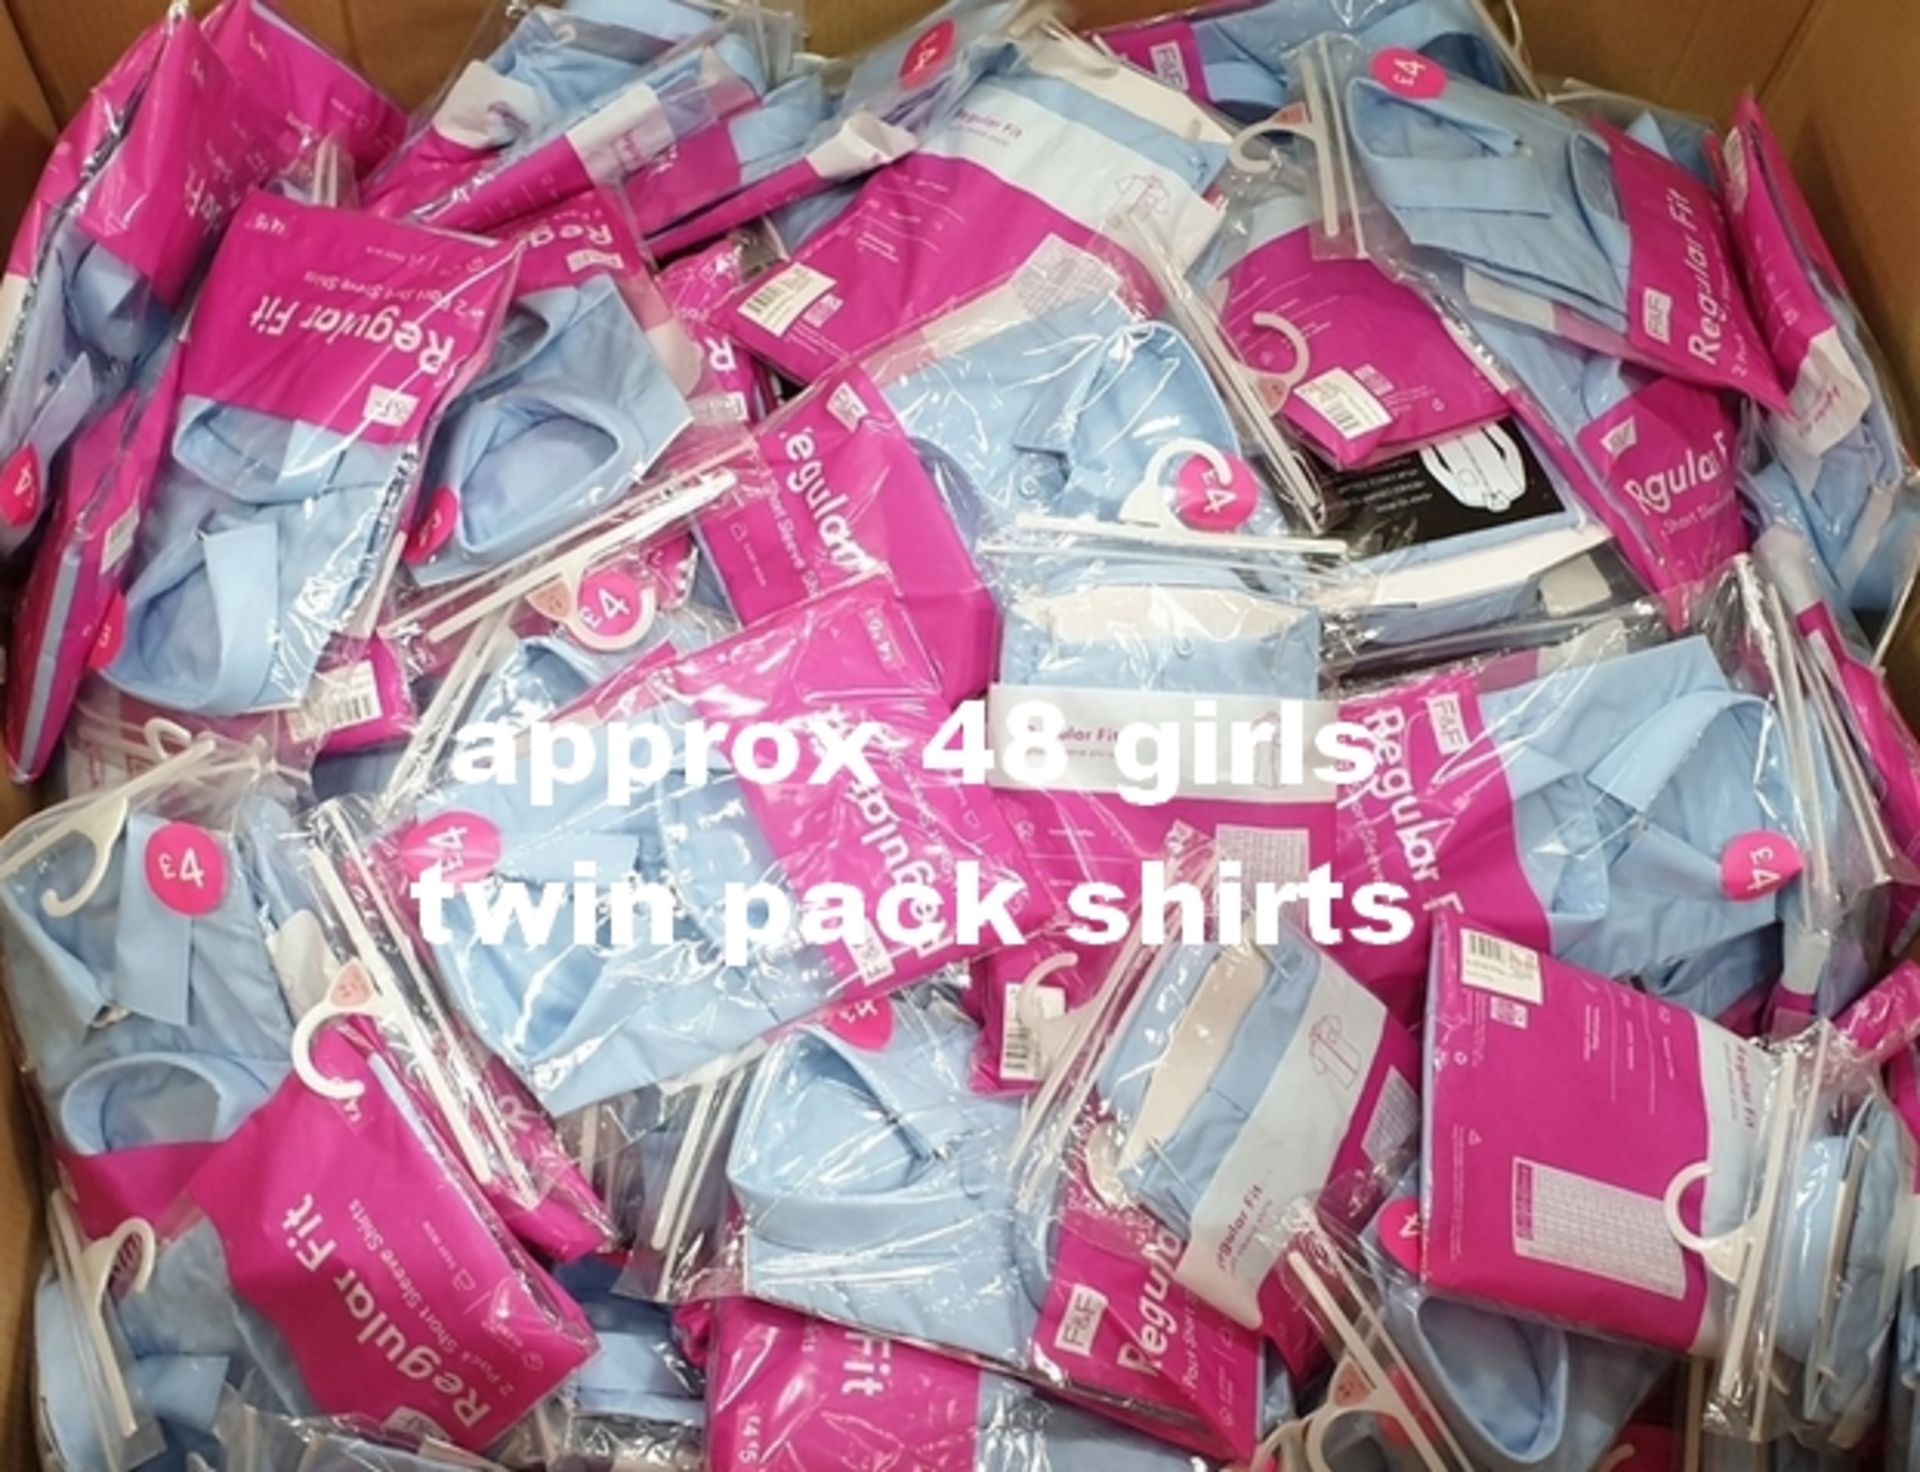 48 mixed girls and boys twin packs of shirts sizes from 5 to 13.